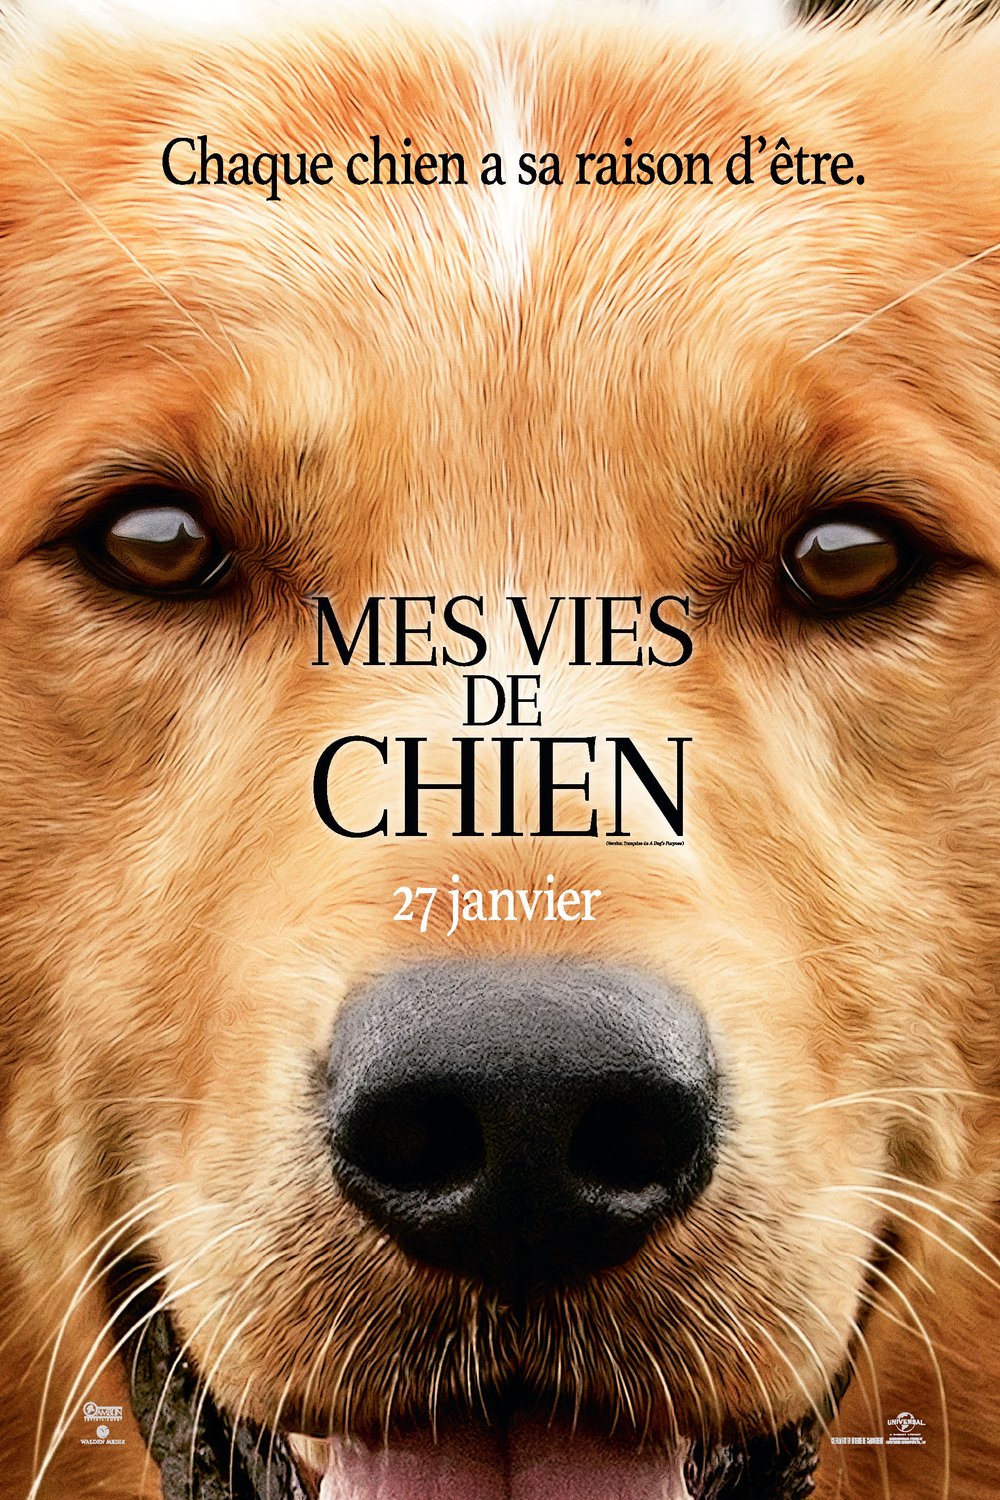 Poster of the movie Mes vies de chien